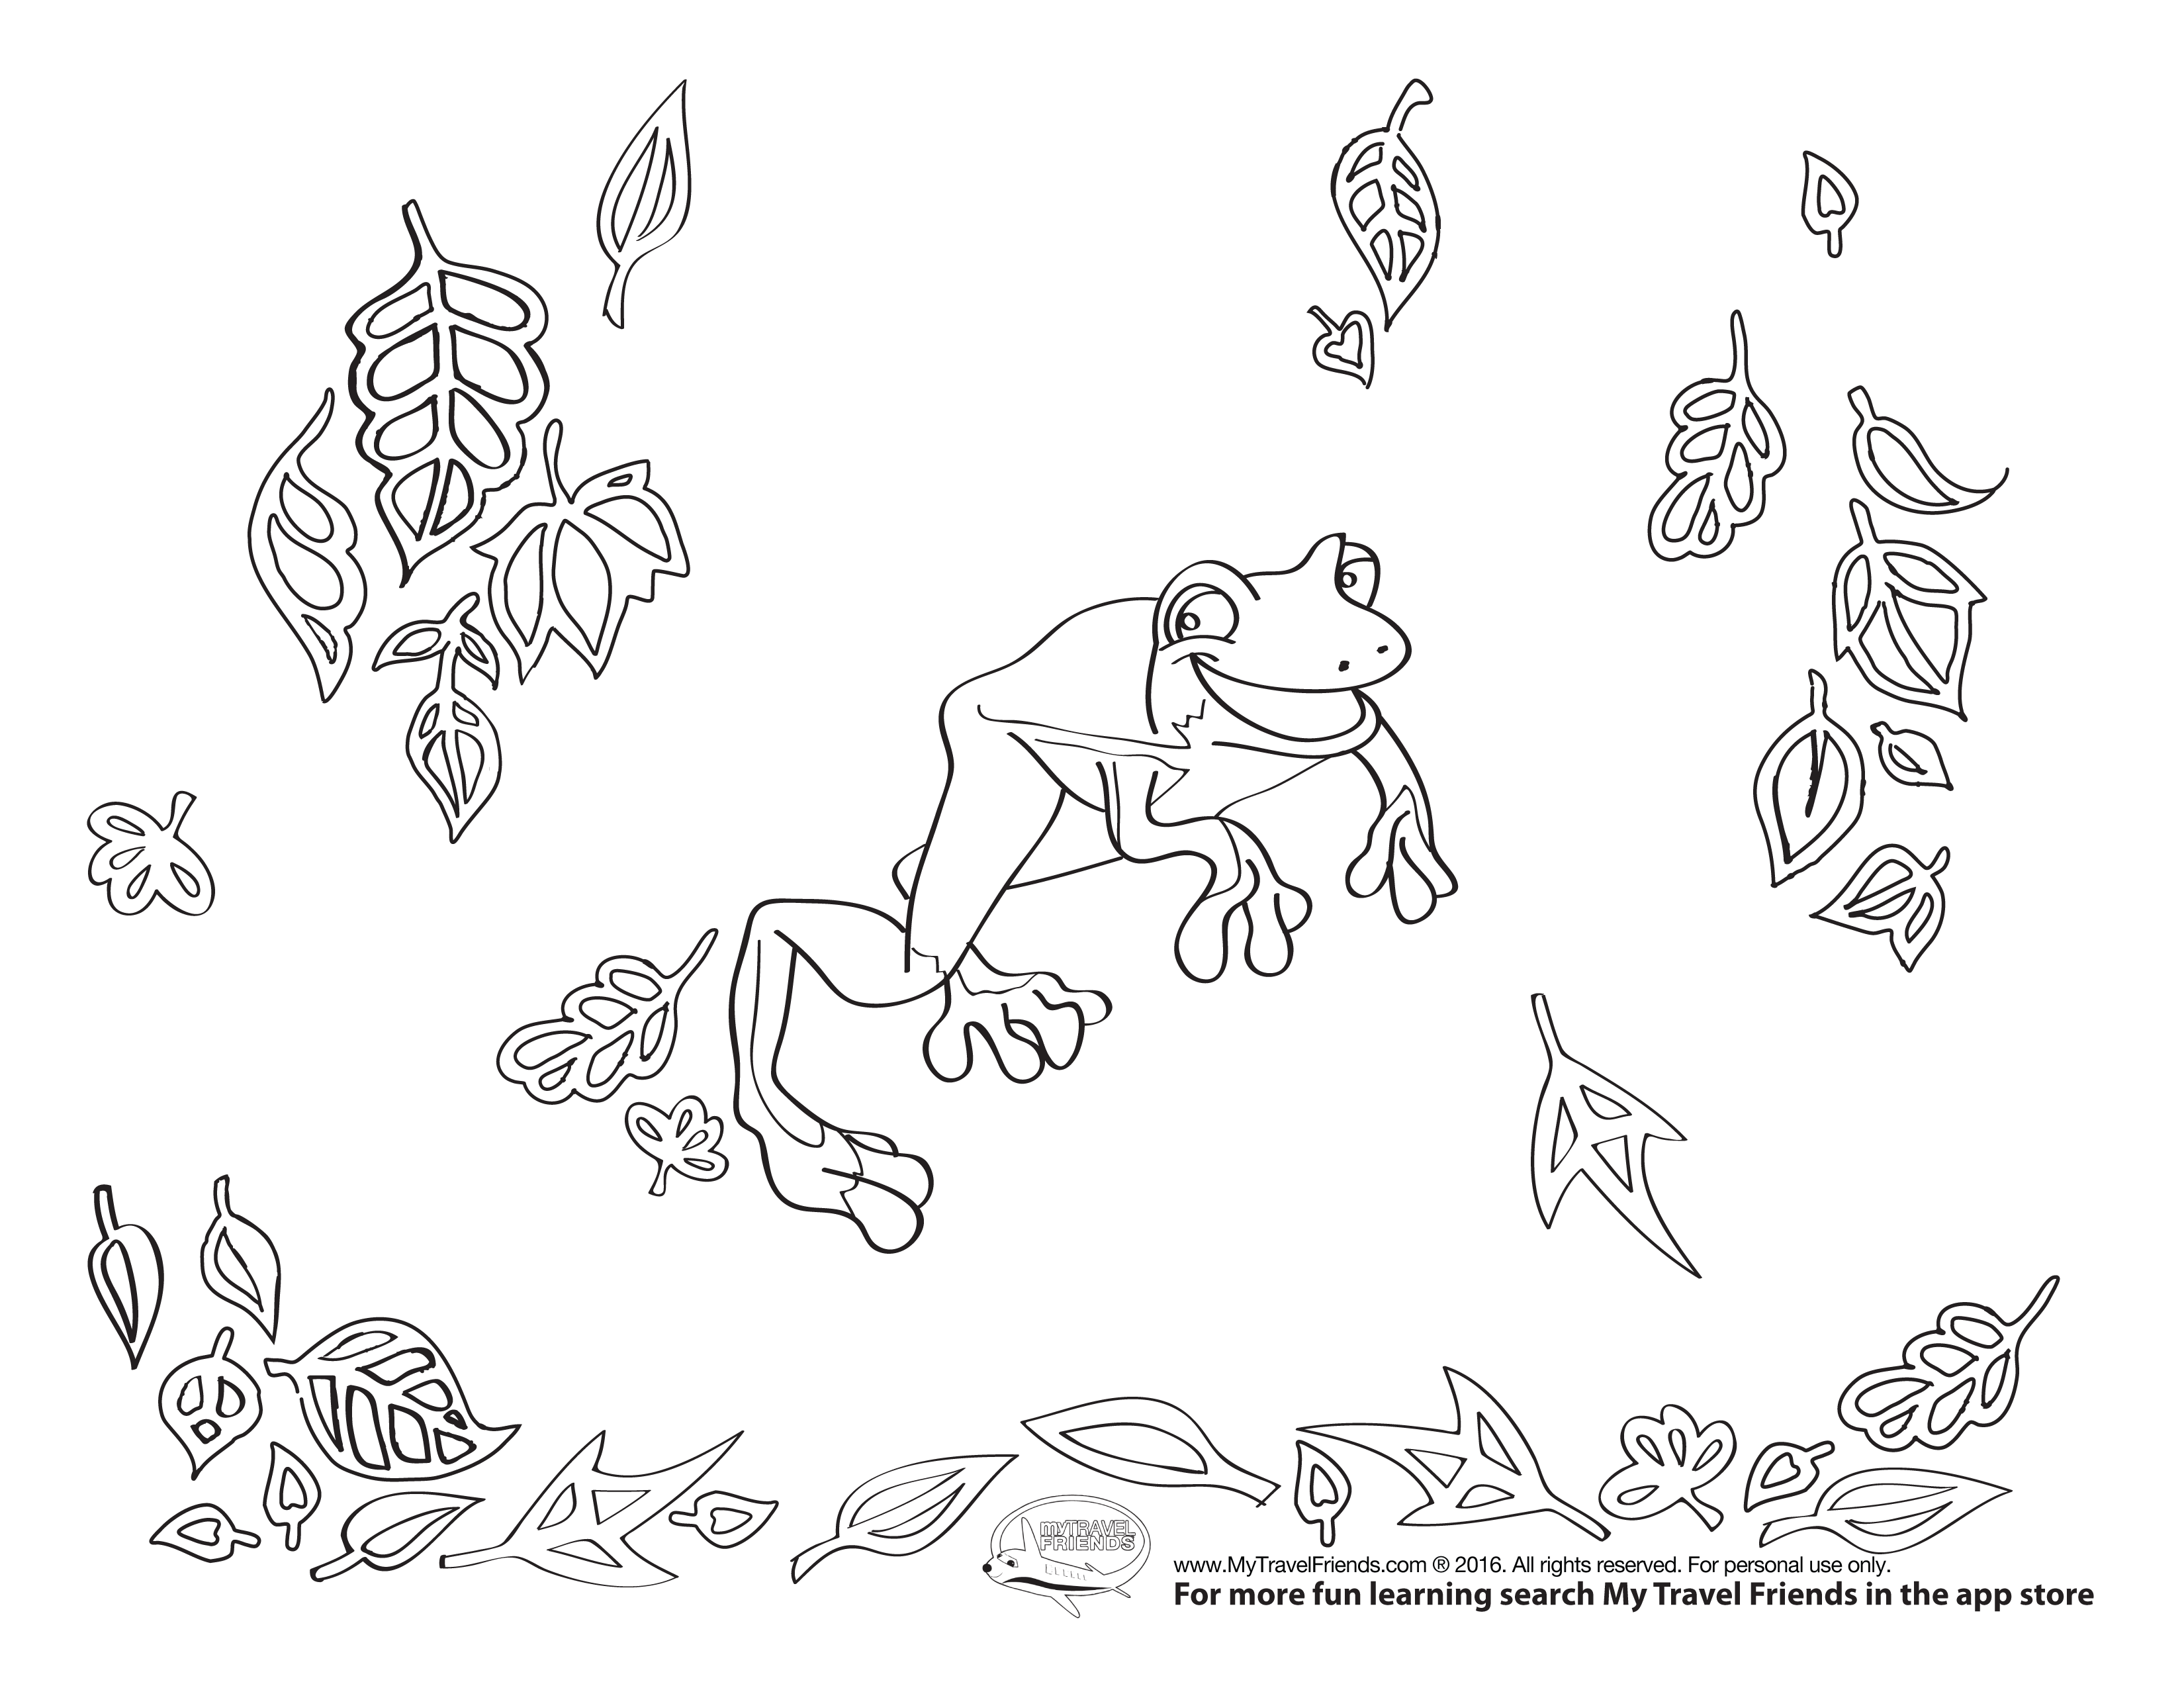 Bonzo and leaves coloring page large size